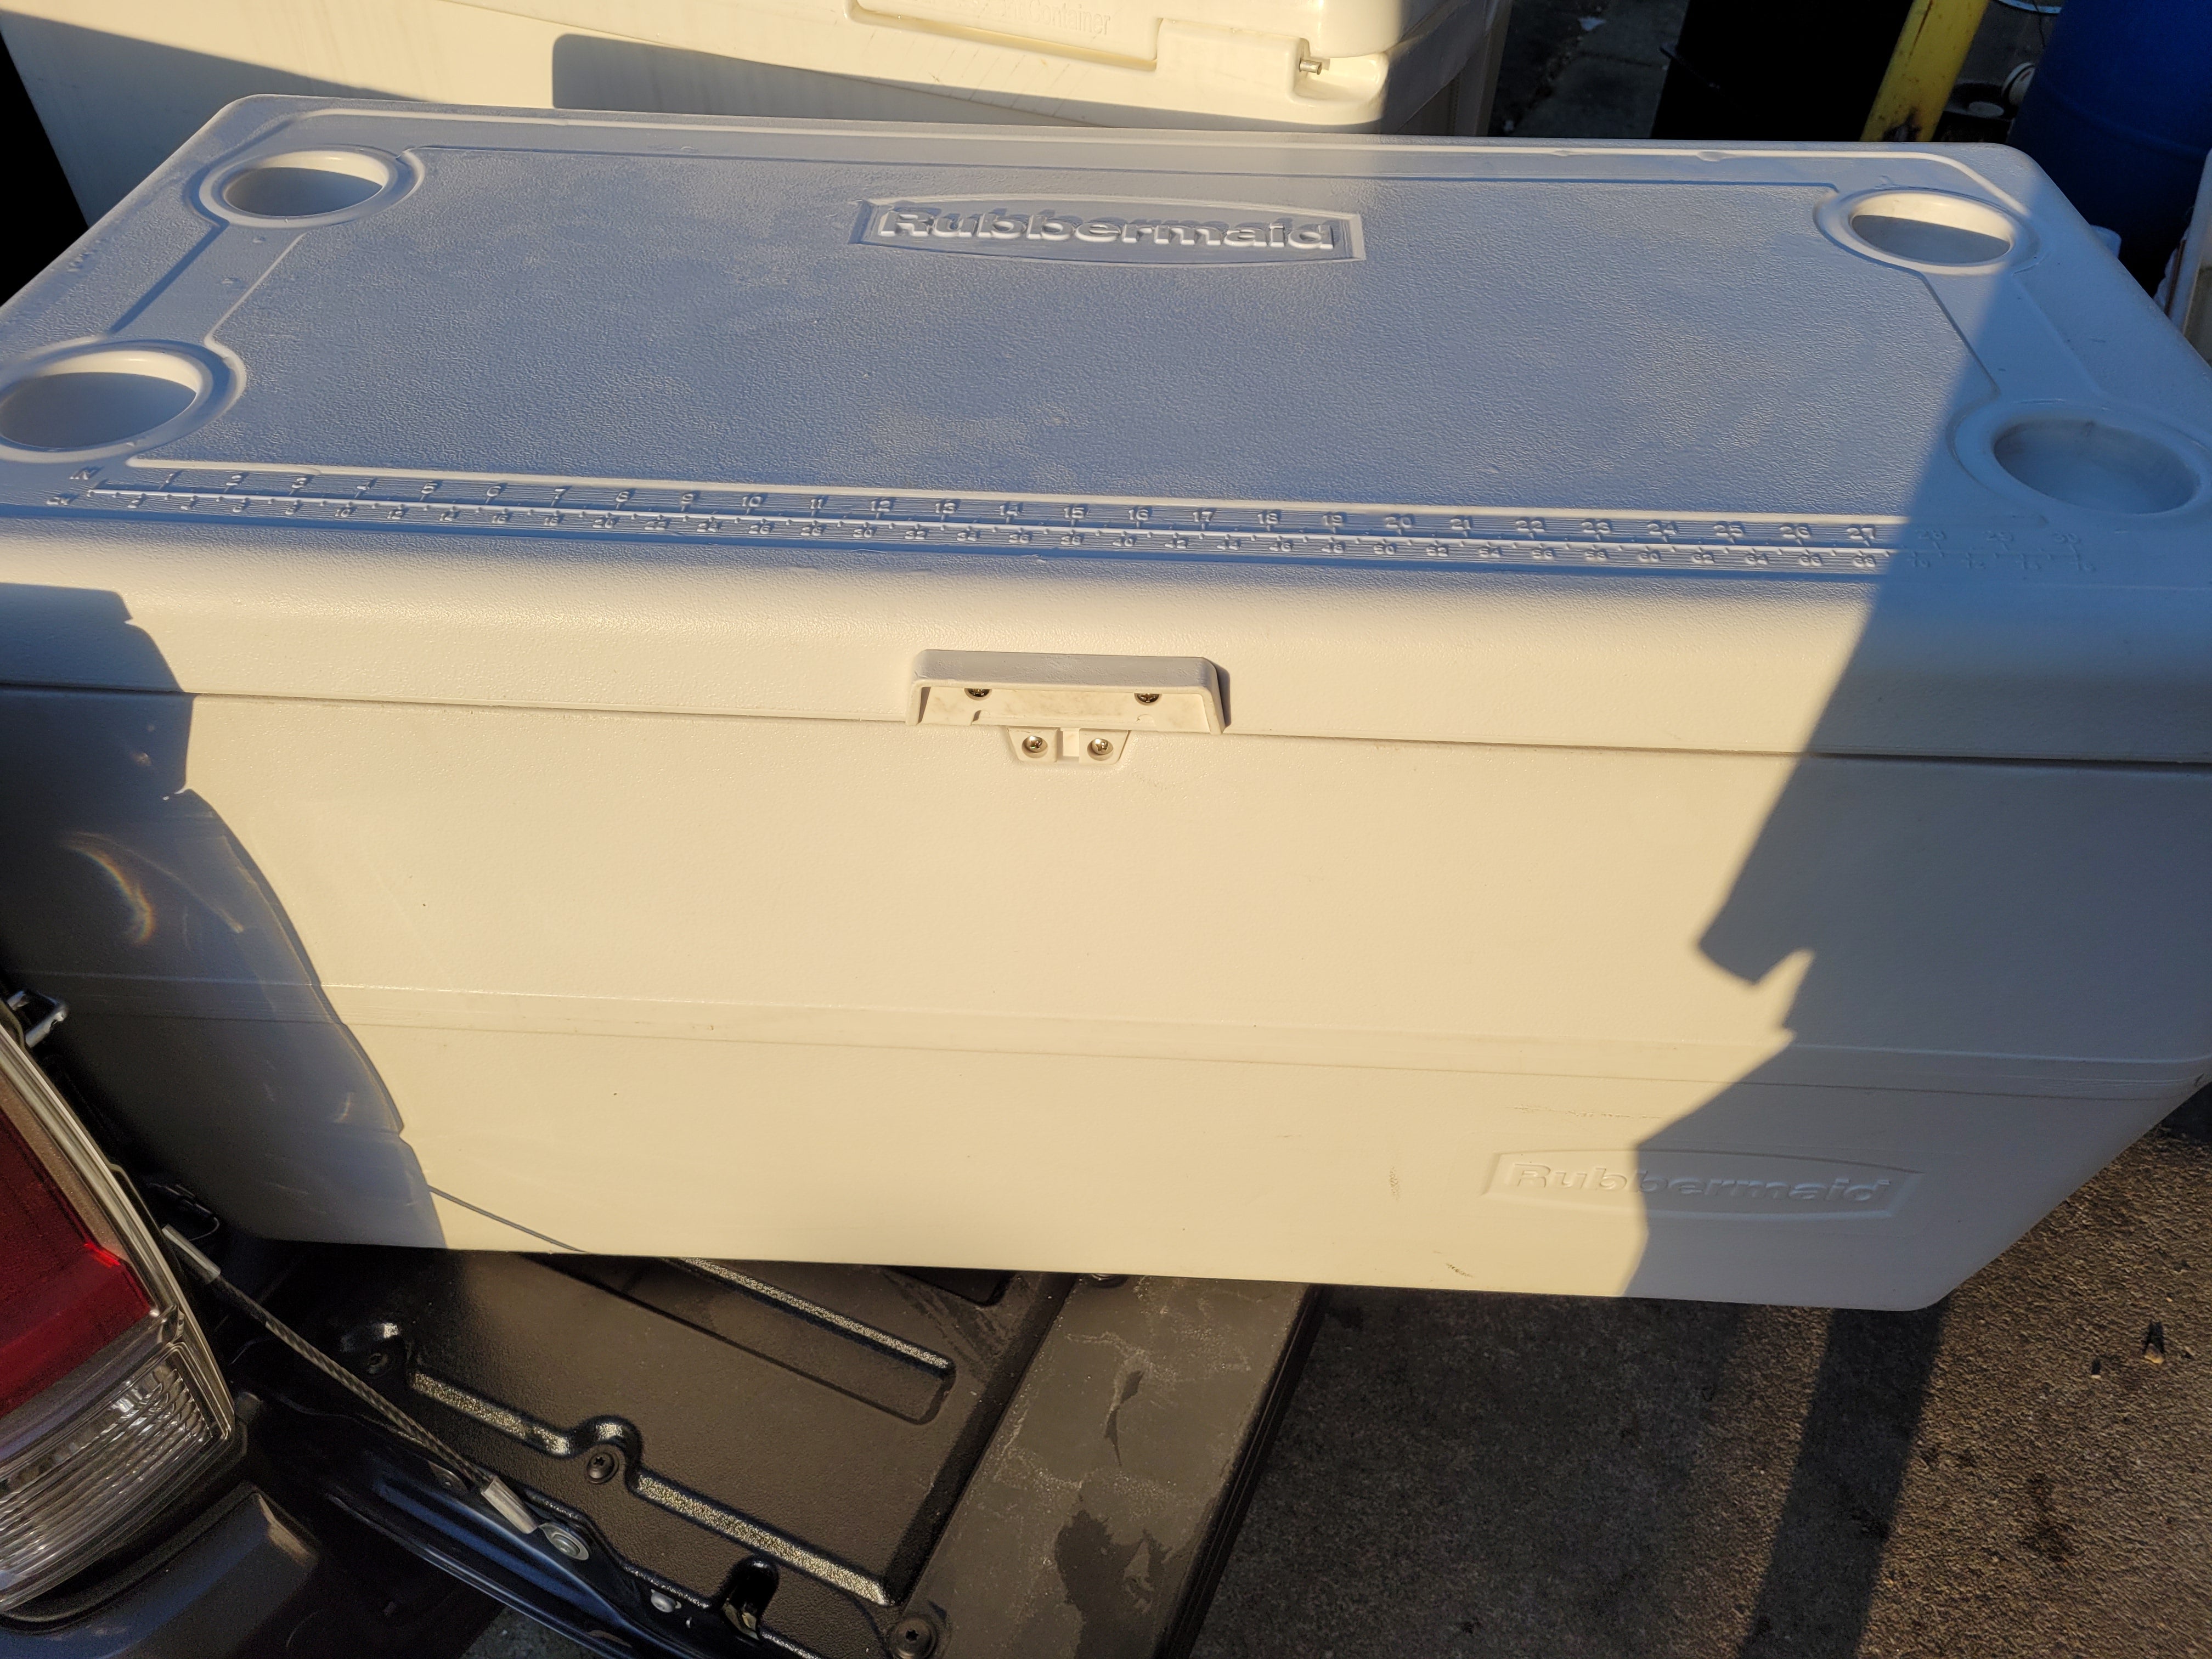 DIY: Upgrading my Old Busted Cooler into a Bootleg Yeti